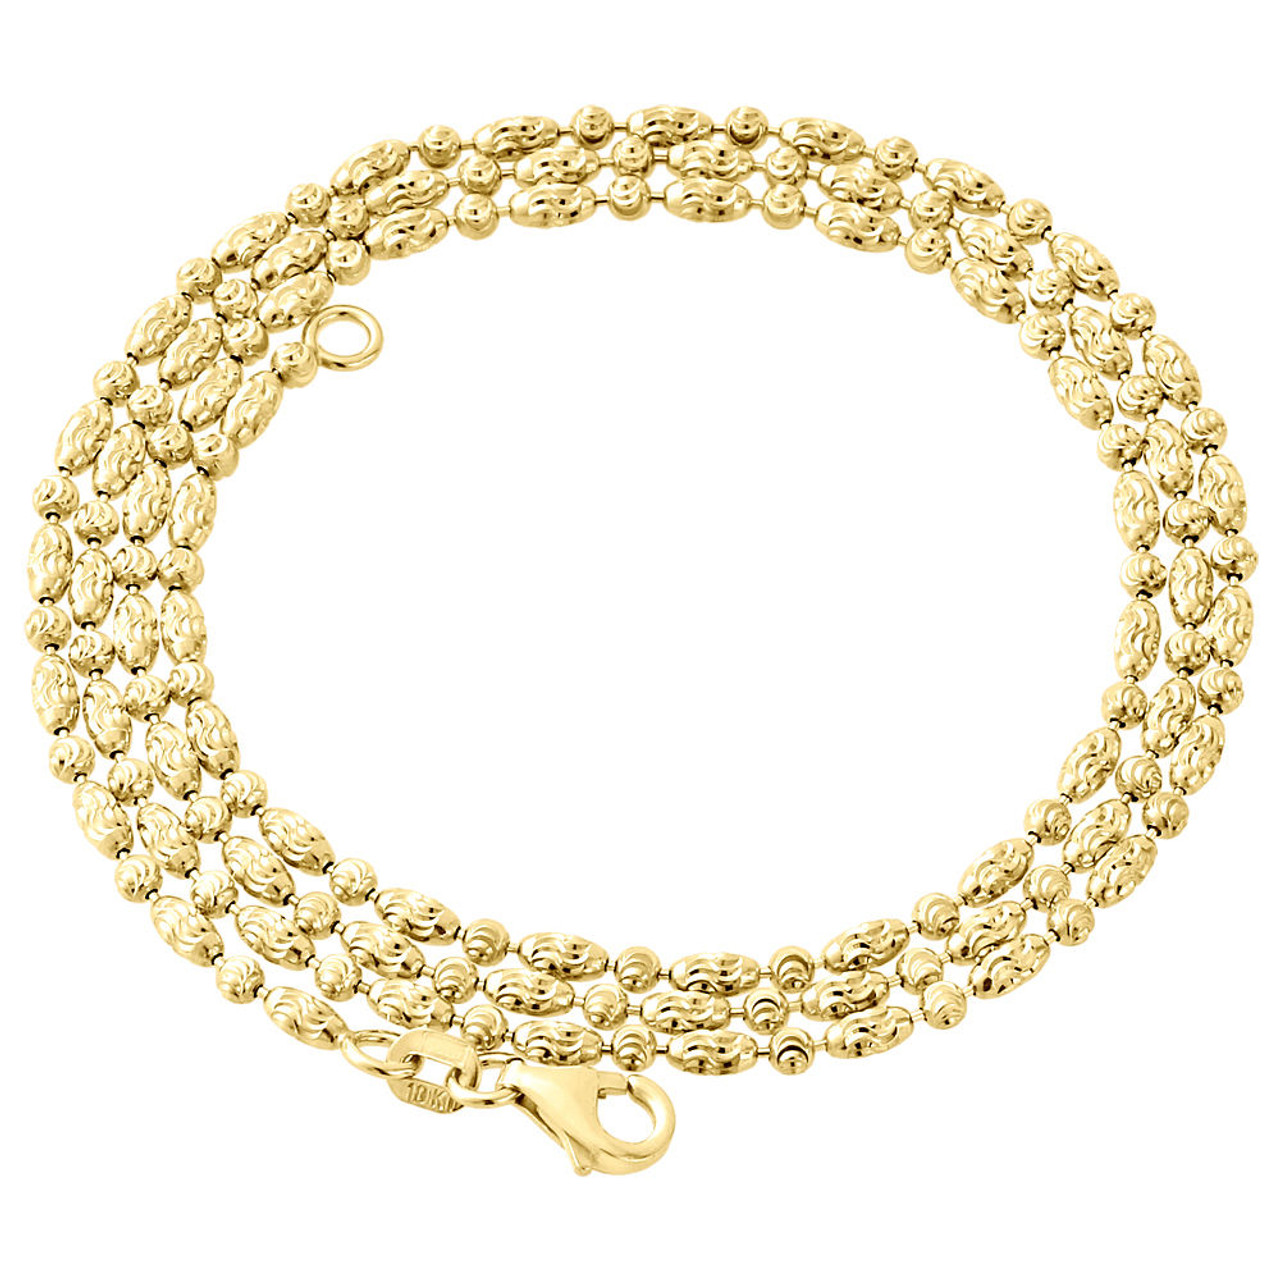 10K Yellow Gold 2mm Beaded Typhoon Moon Cut Italian Chain Necklace 16 - 24 Inches